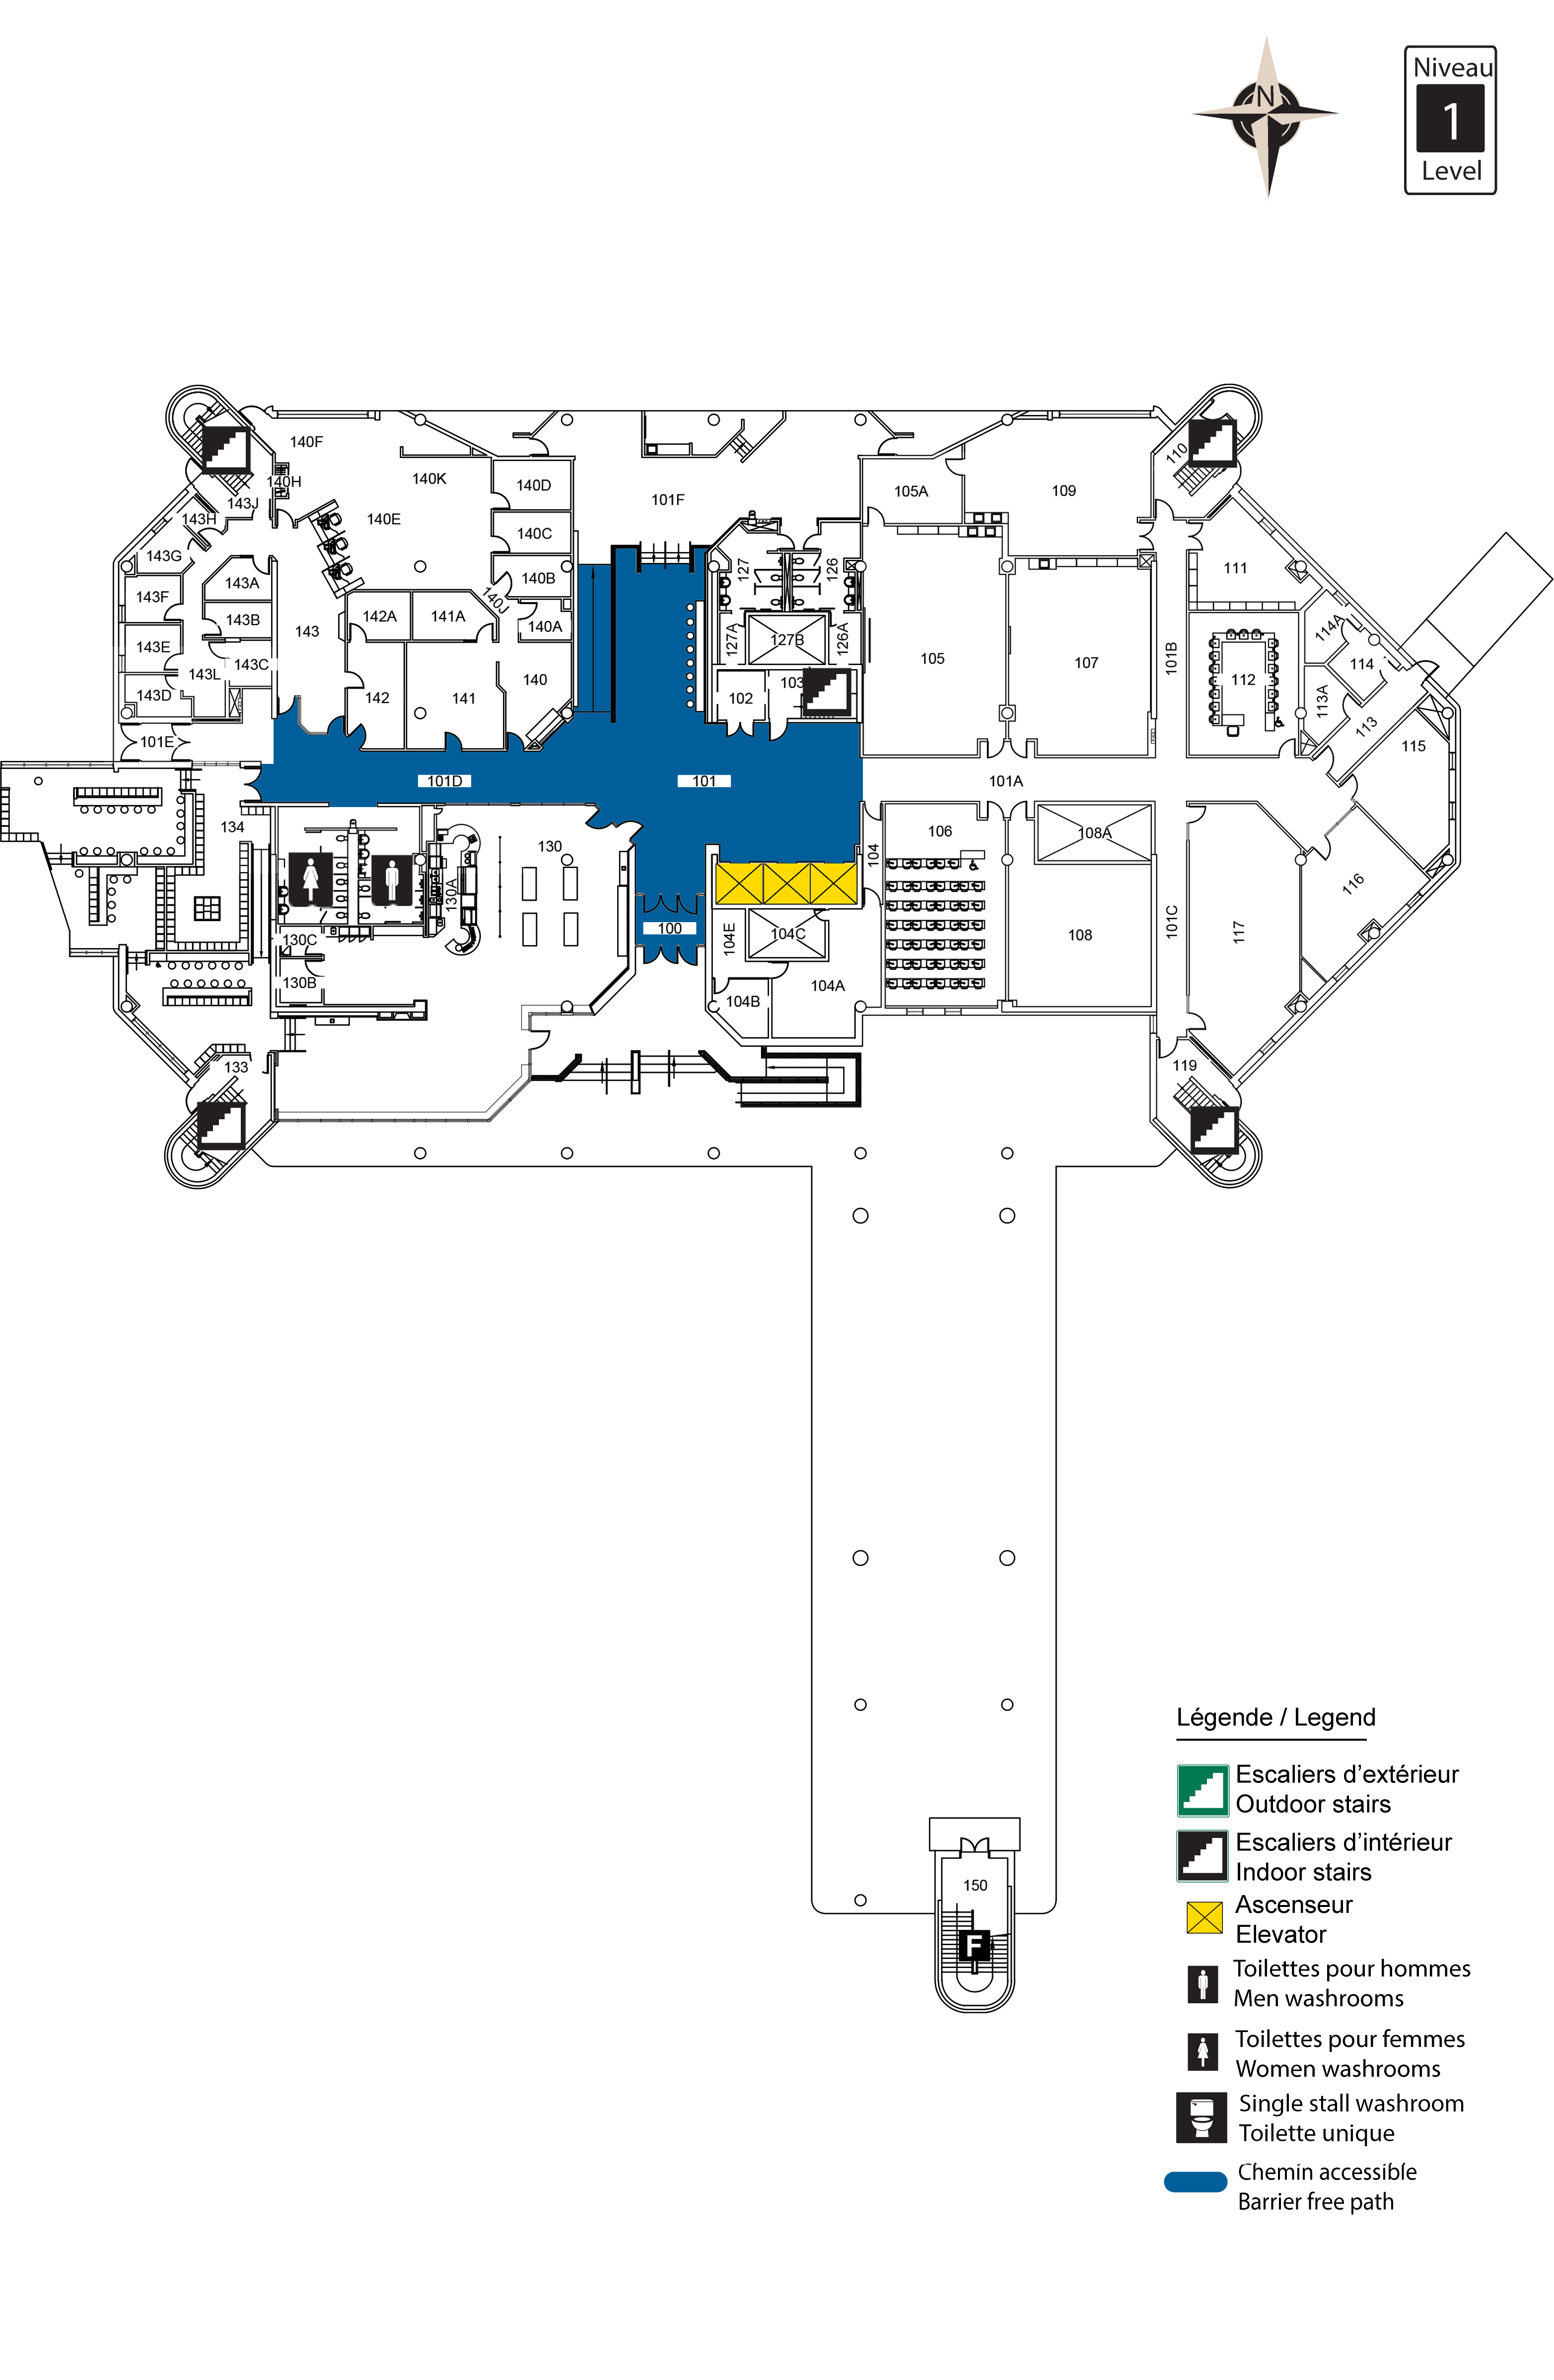 Accessible map of LMX level 1